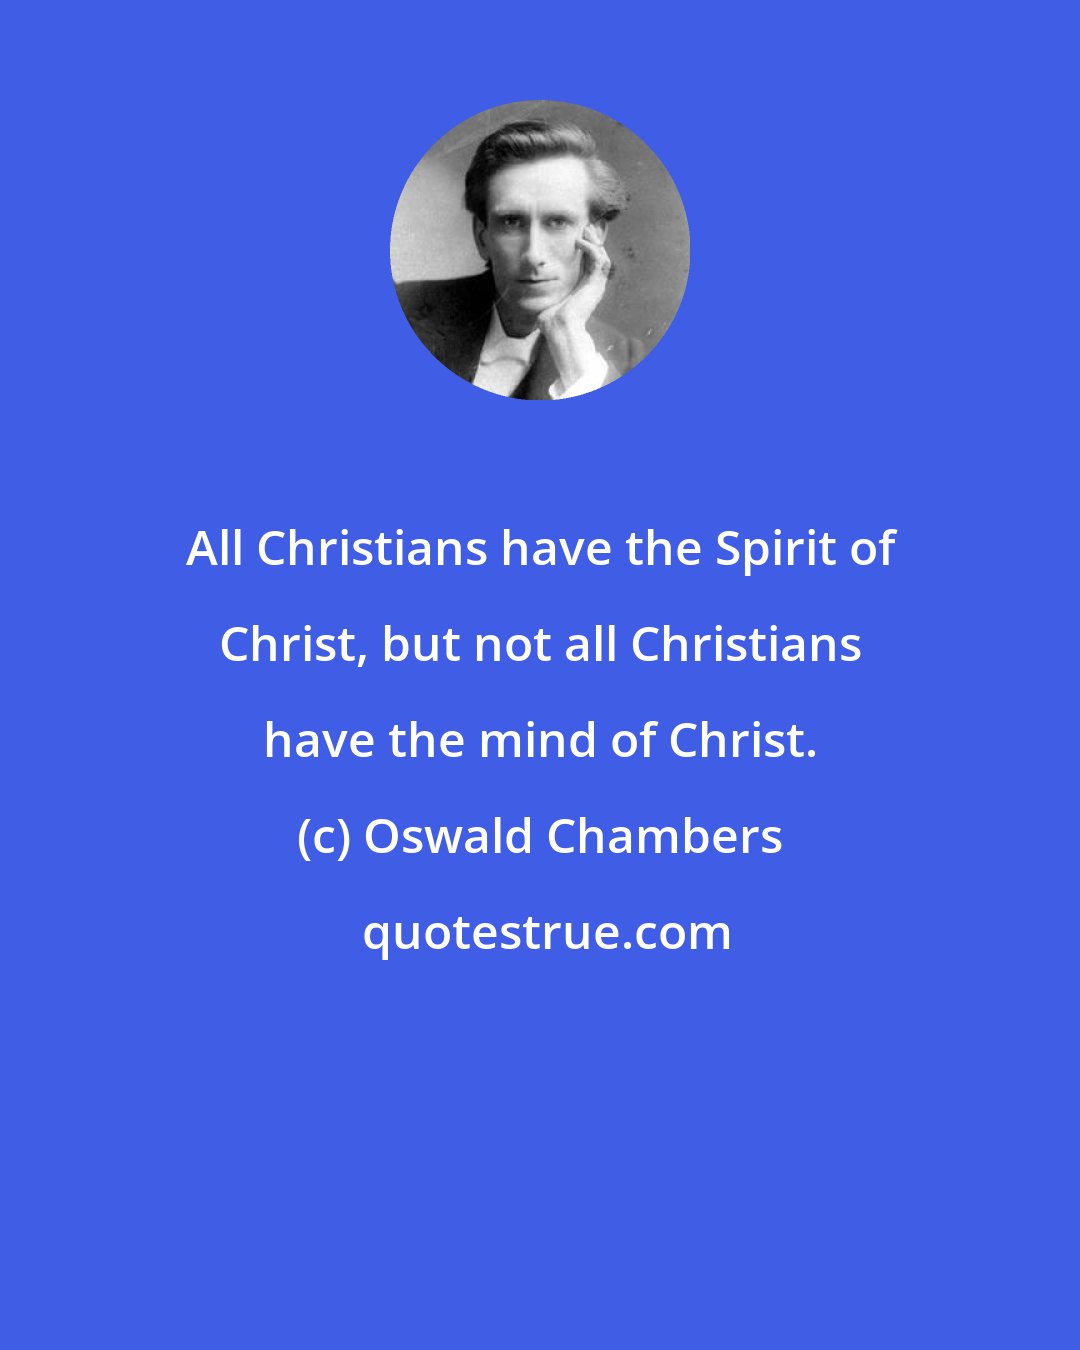 Oswald Chambers: All Christians have the Spirit of Christ, but not all Christians have the mind of Christ.